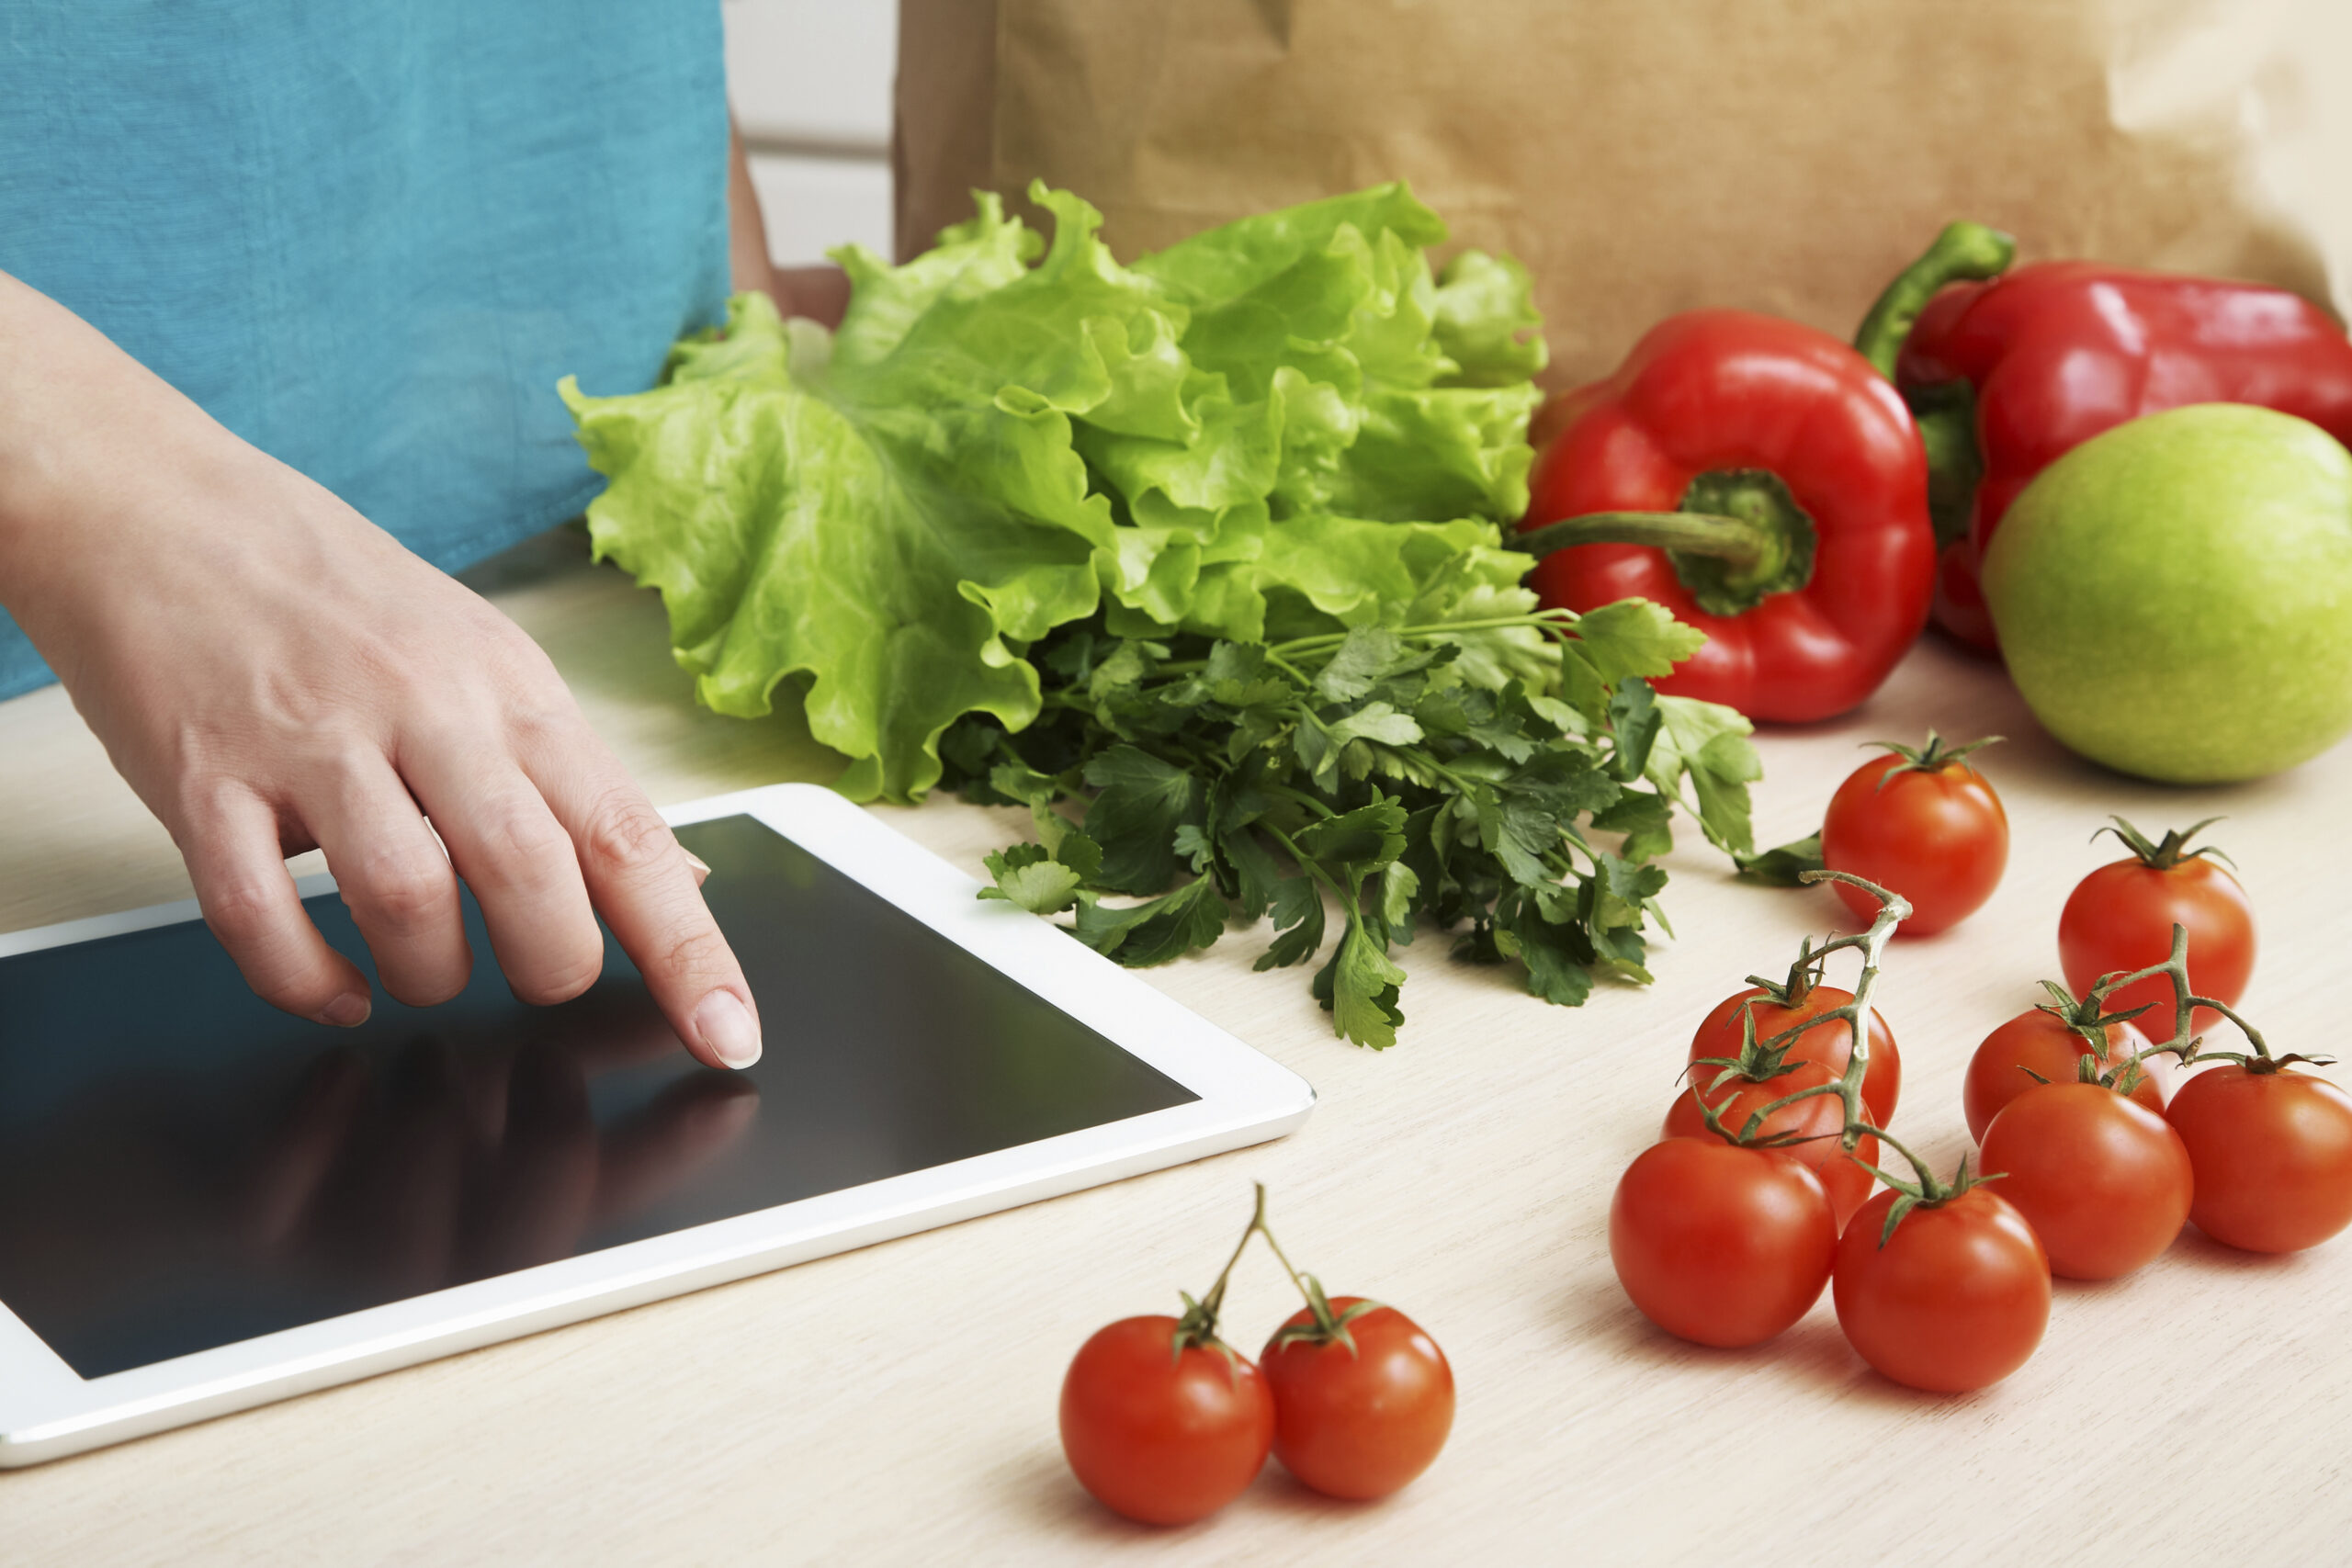 Report: Google data reveals top healthy food trends this year